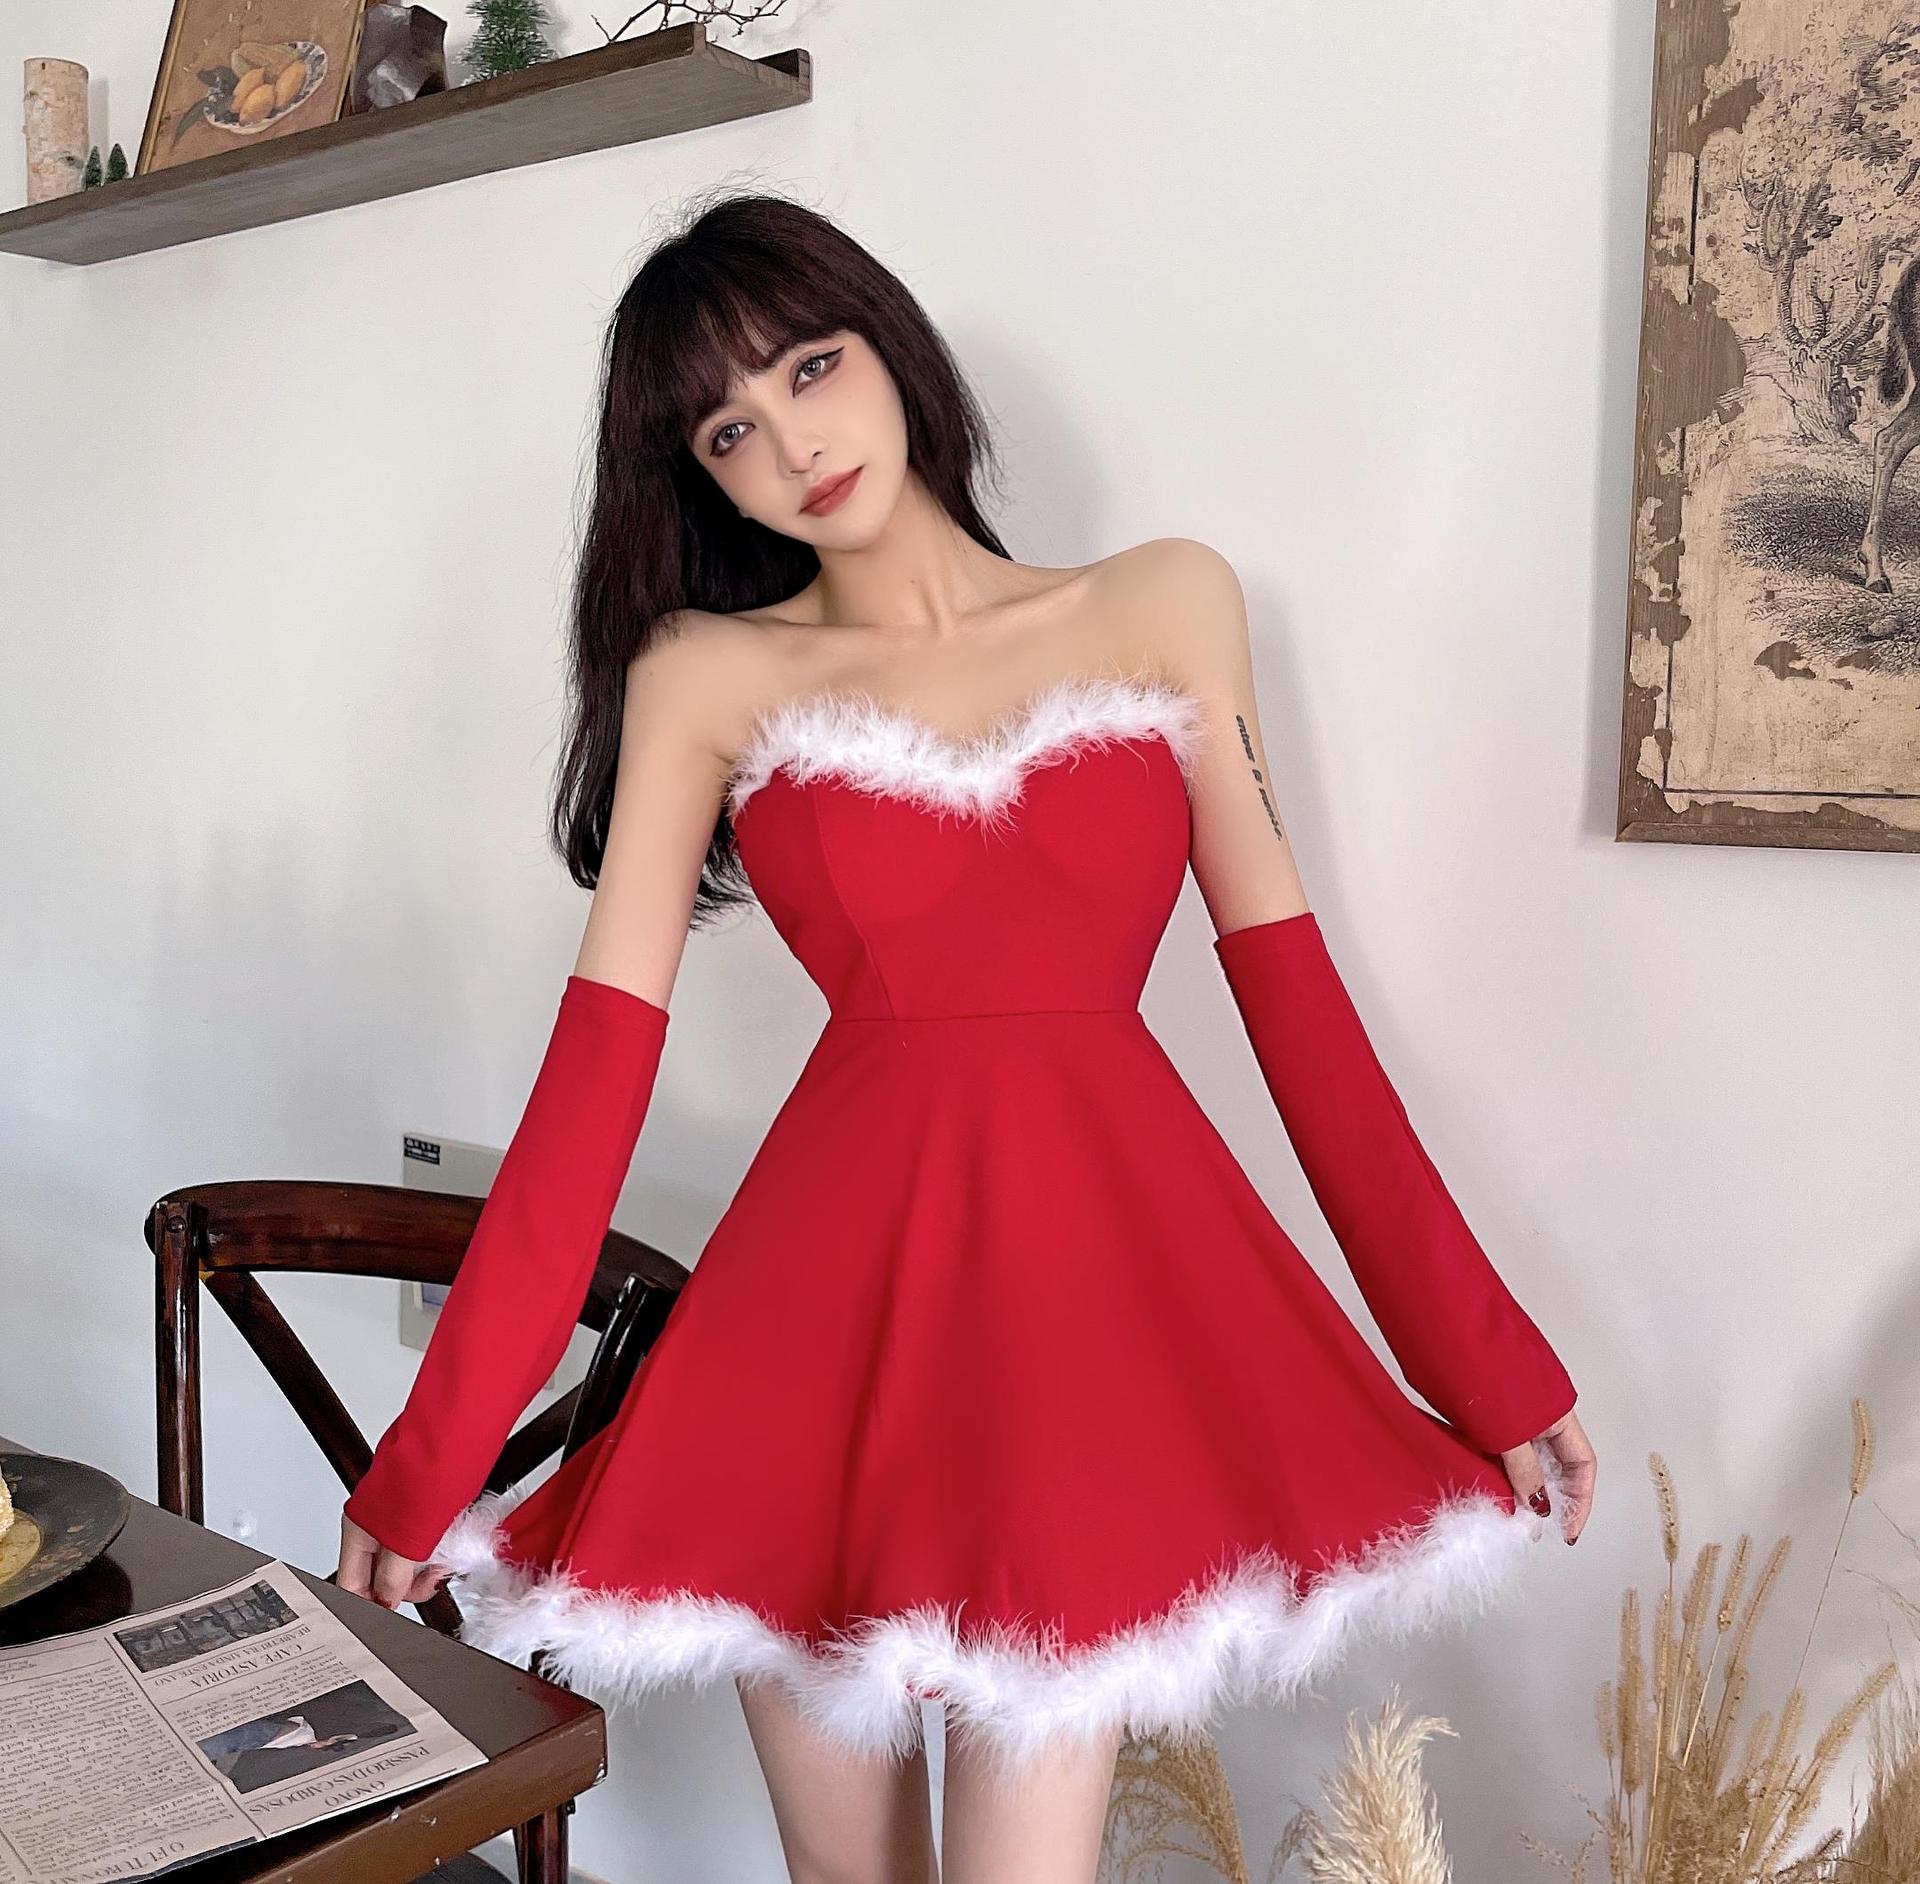 Simple Ideas for choosing a unique dress & party theme this Christmas 2023